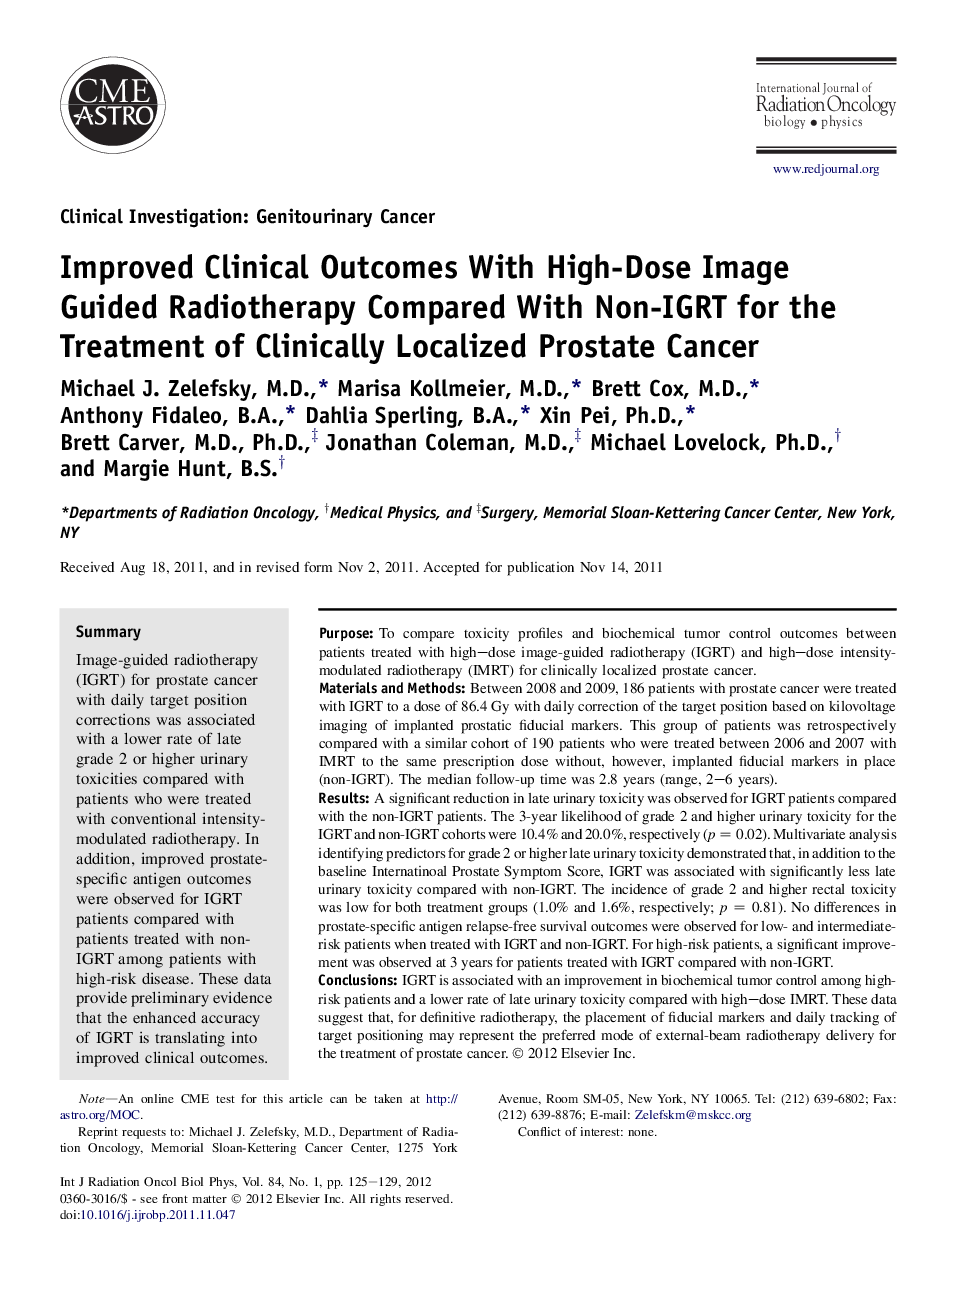 Improved Clinical Outcomes With High-Dose Image Guided Radiotherapy Compared With Non-IGRT for the Treatment of Clinically Localized Prostate Cancer